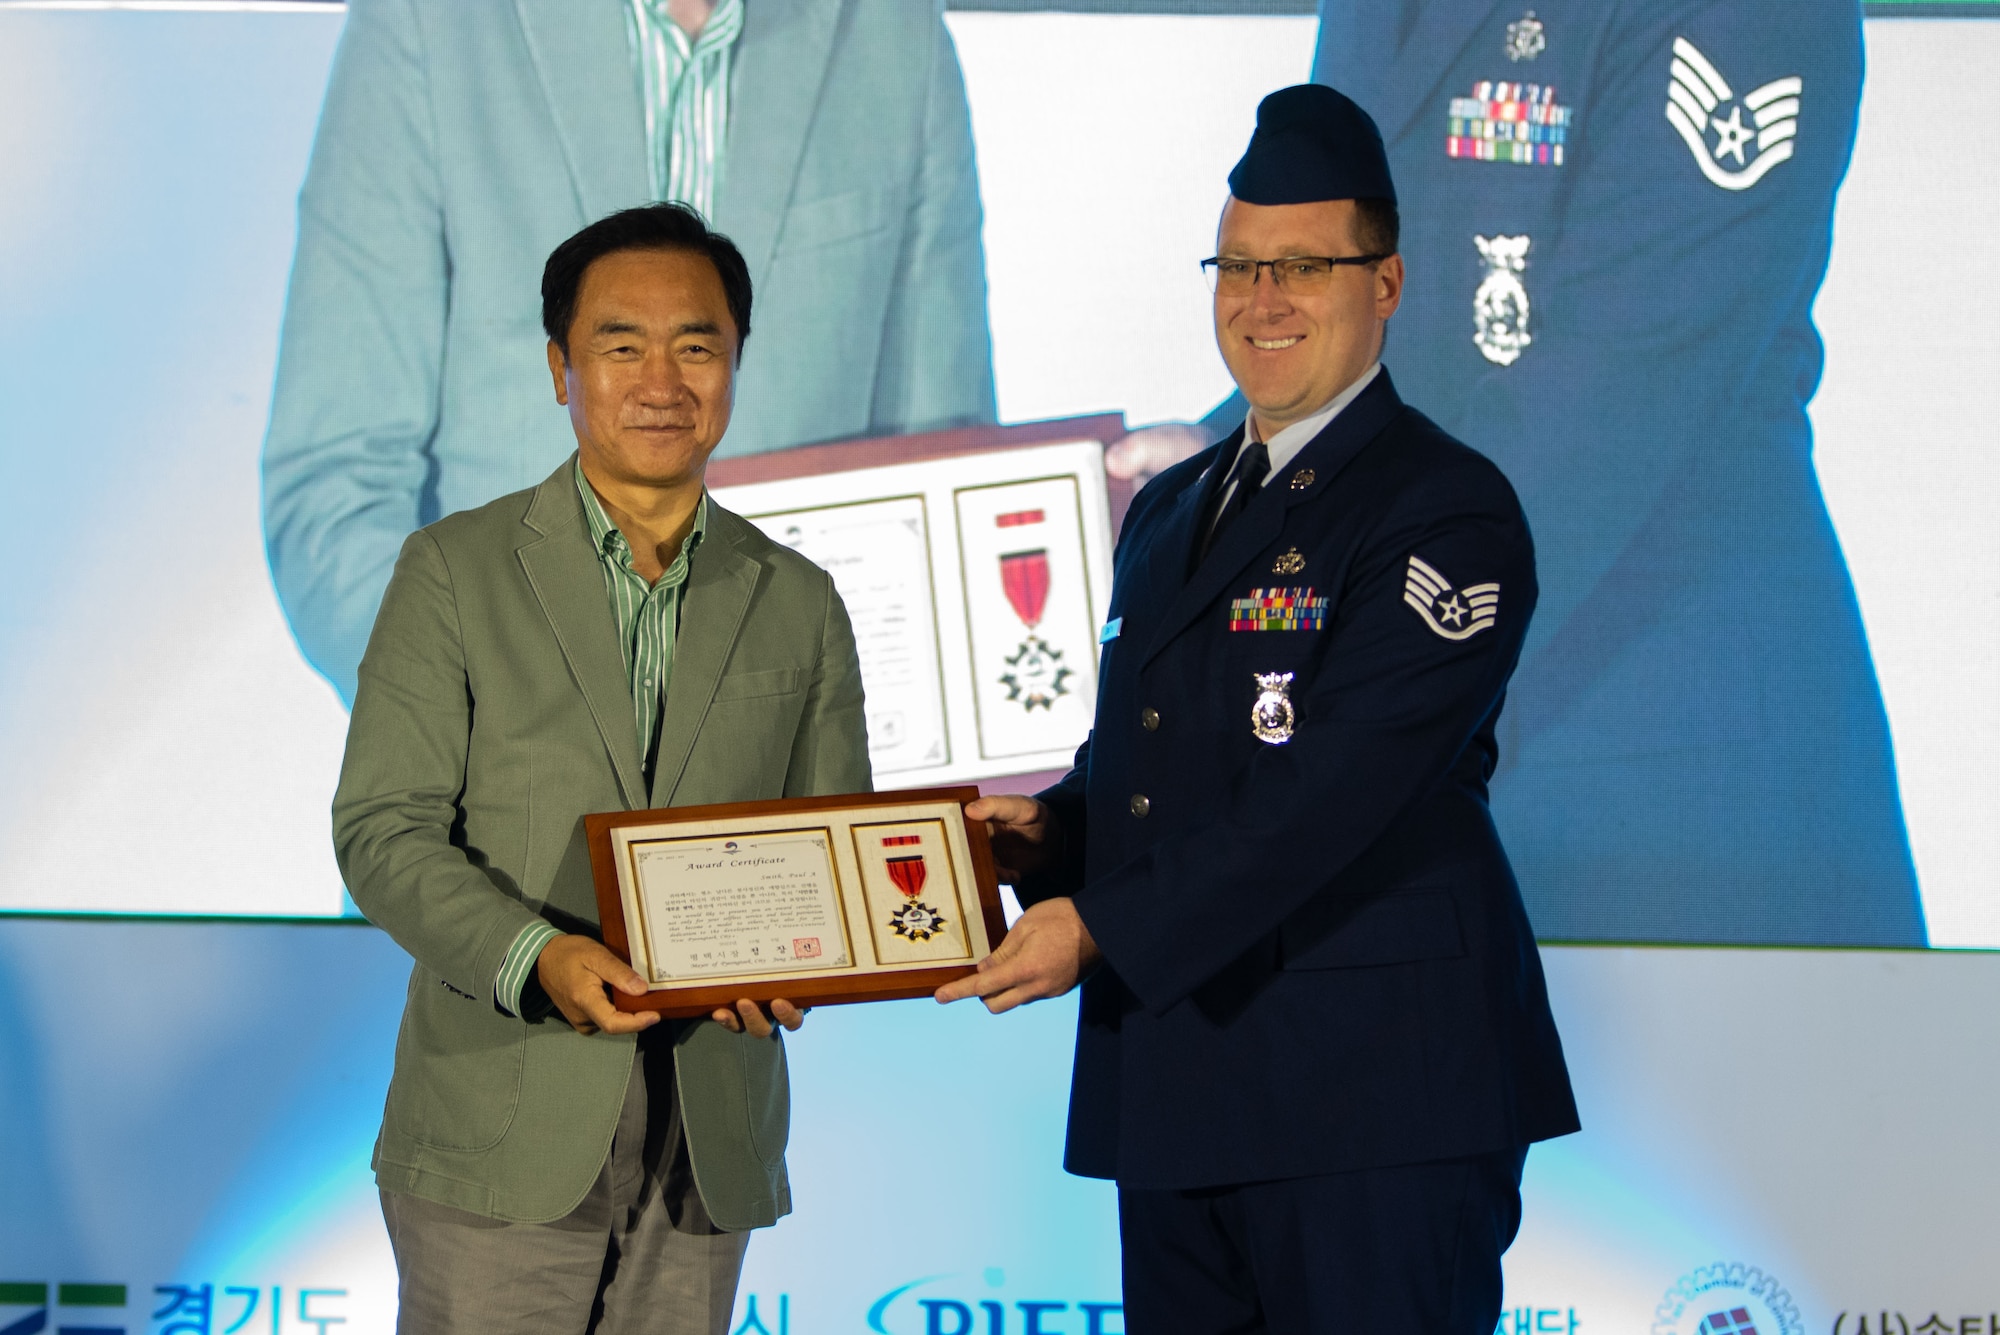 Jang Seon Jung, Pyeongtaek City mayor, presents a certificate of commendation to Staff. Sgt. Paul Smith, 51st Civil Engineer Squadron fire department NCO in charge of logistics, during the 19th Republic of Korea and the United States Cultural Festival, in front of Osan Air Base, Republic of Korea, Oct. 8, 2022.